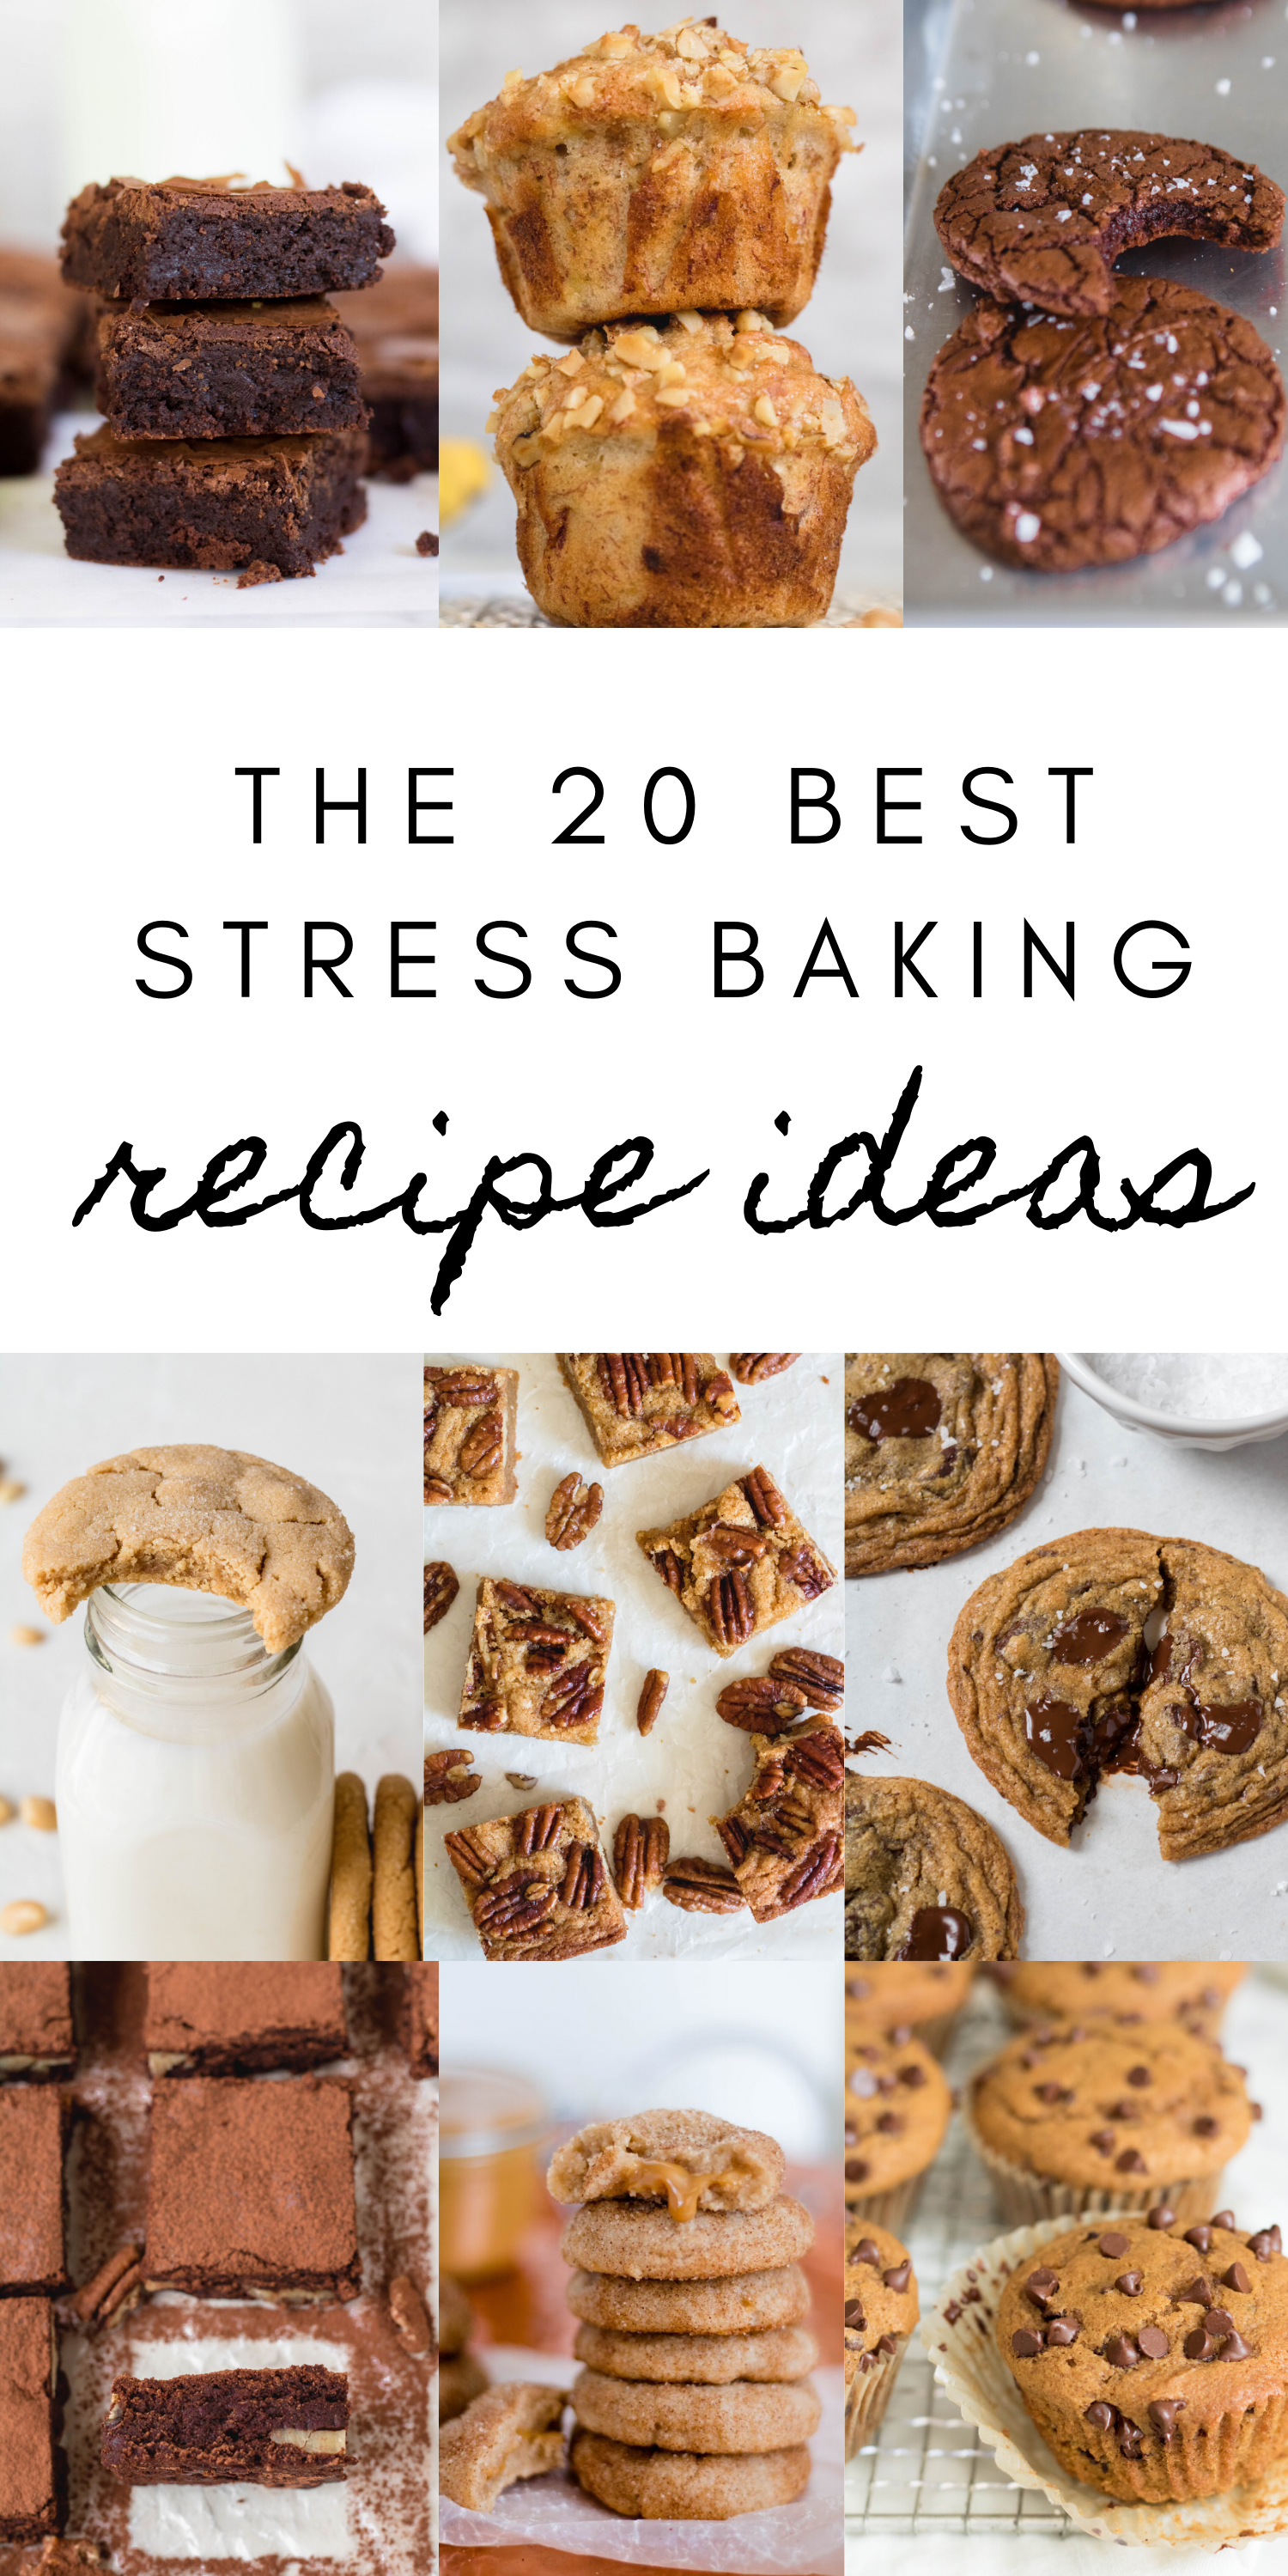 The best stress baking recipe ideas collage for pinterest 